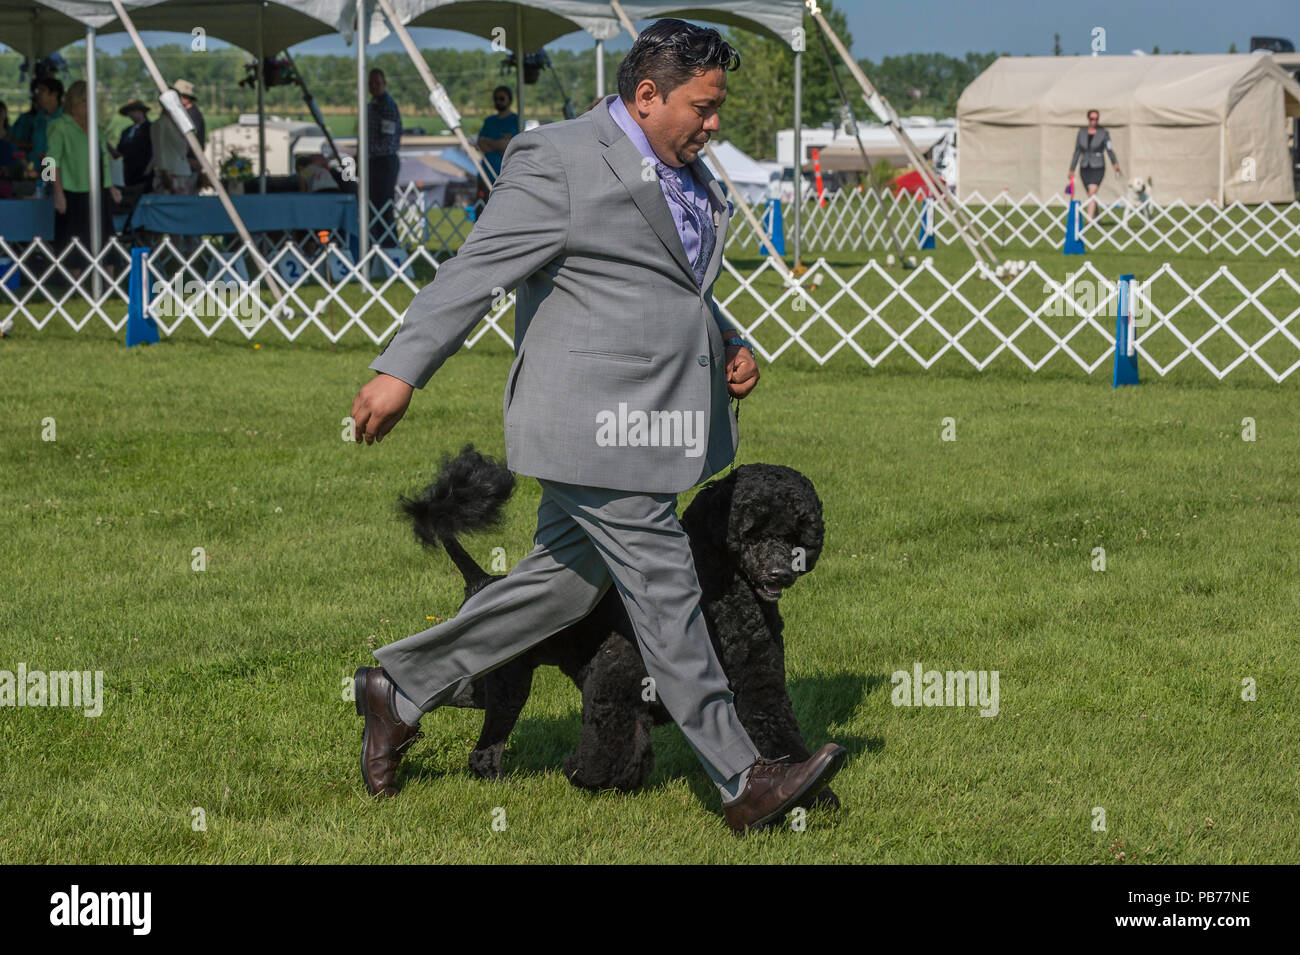 Portuguese water dog, Evelyn Kenny Kennel and Obedience Club Dog show, Alberta, Canada Stock Photo